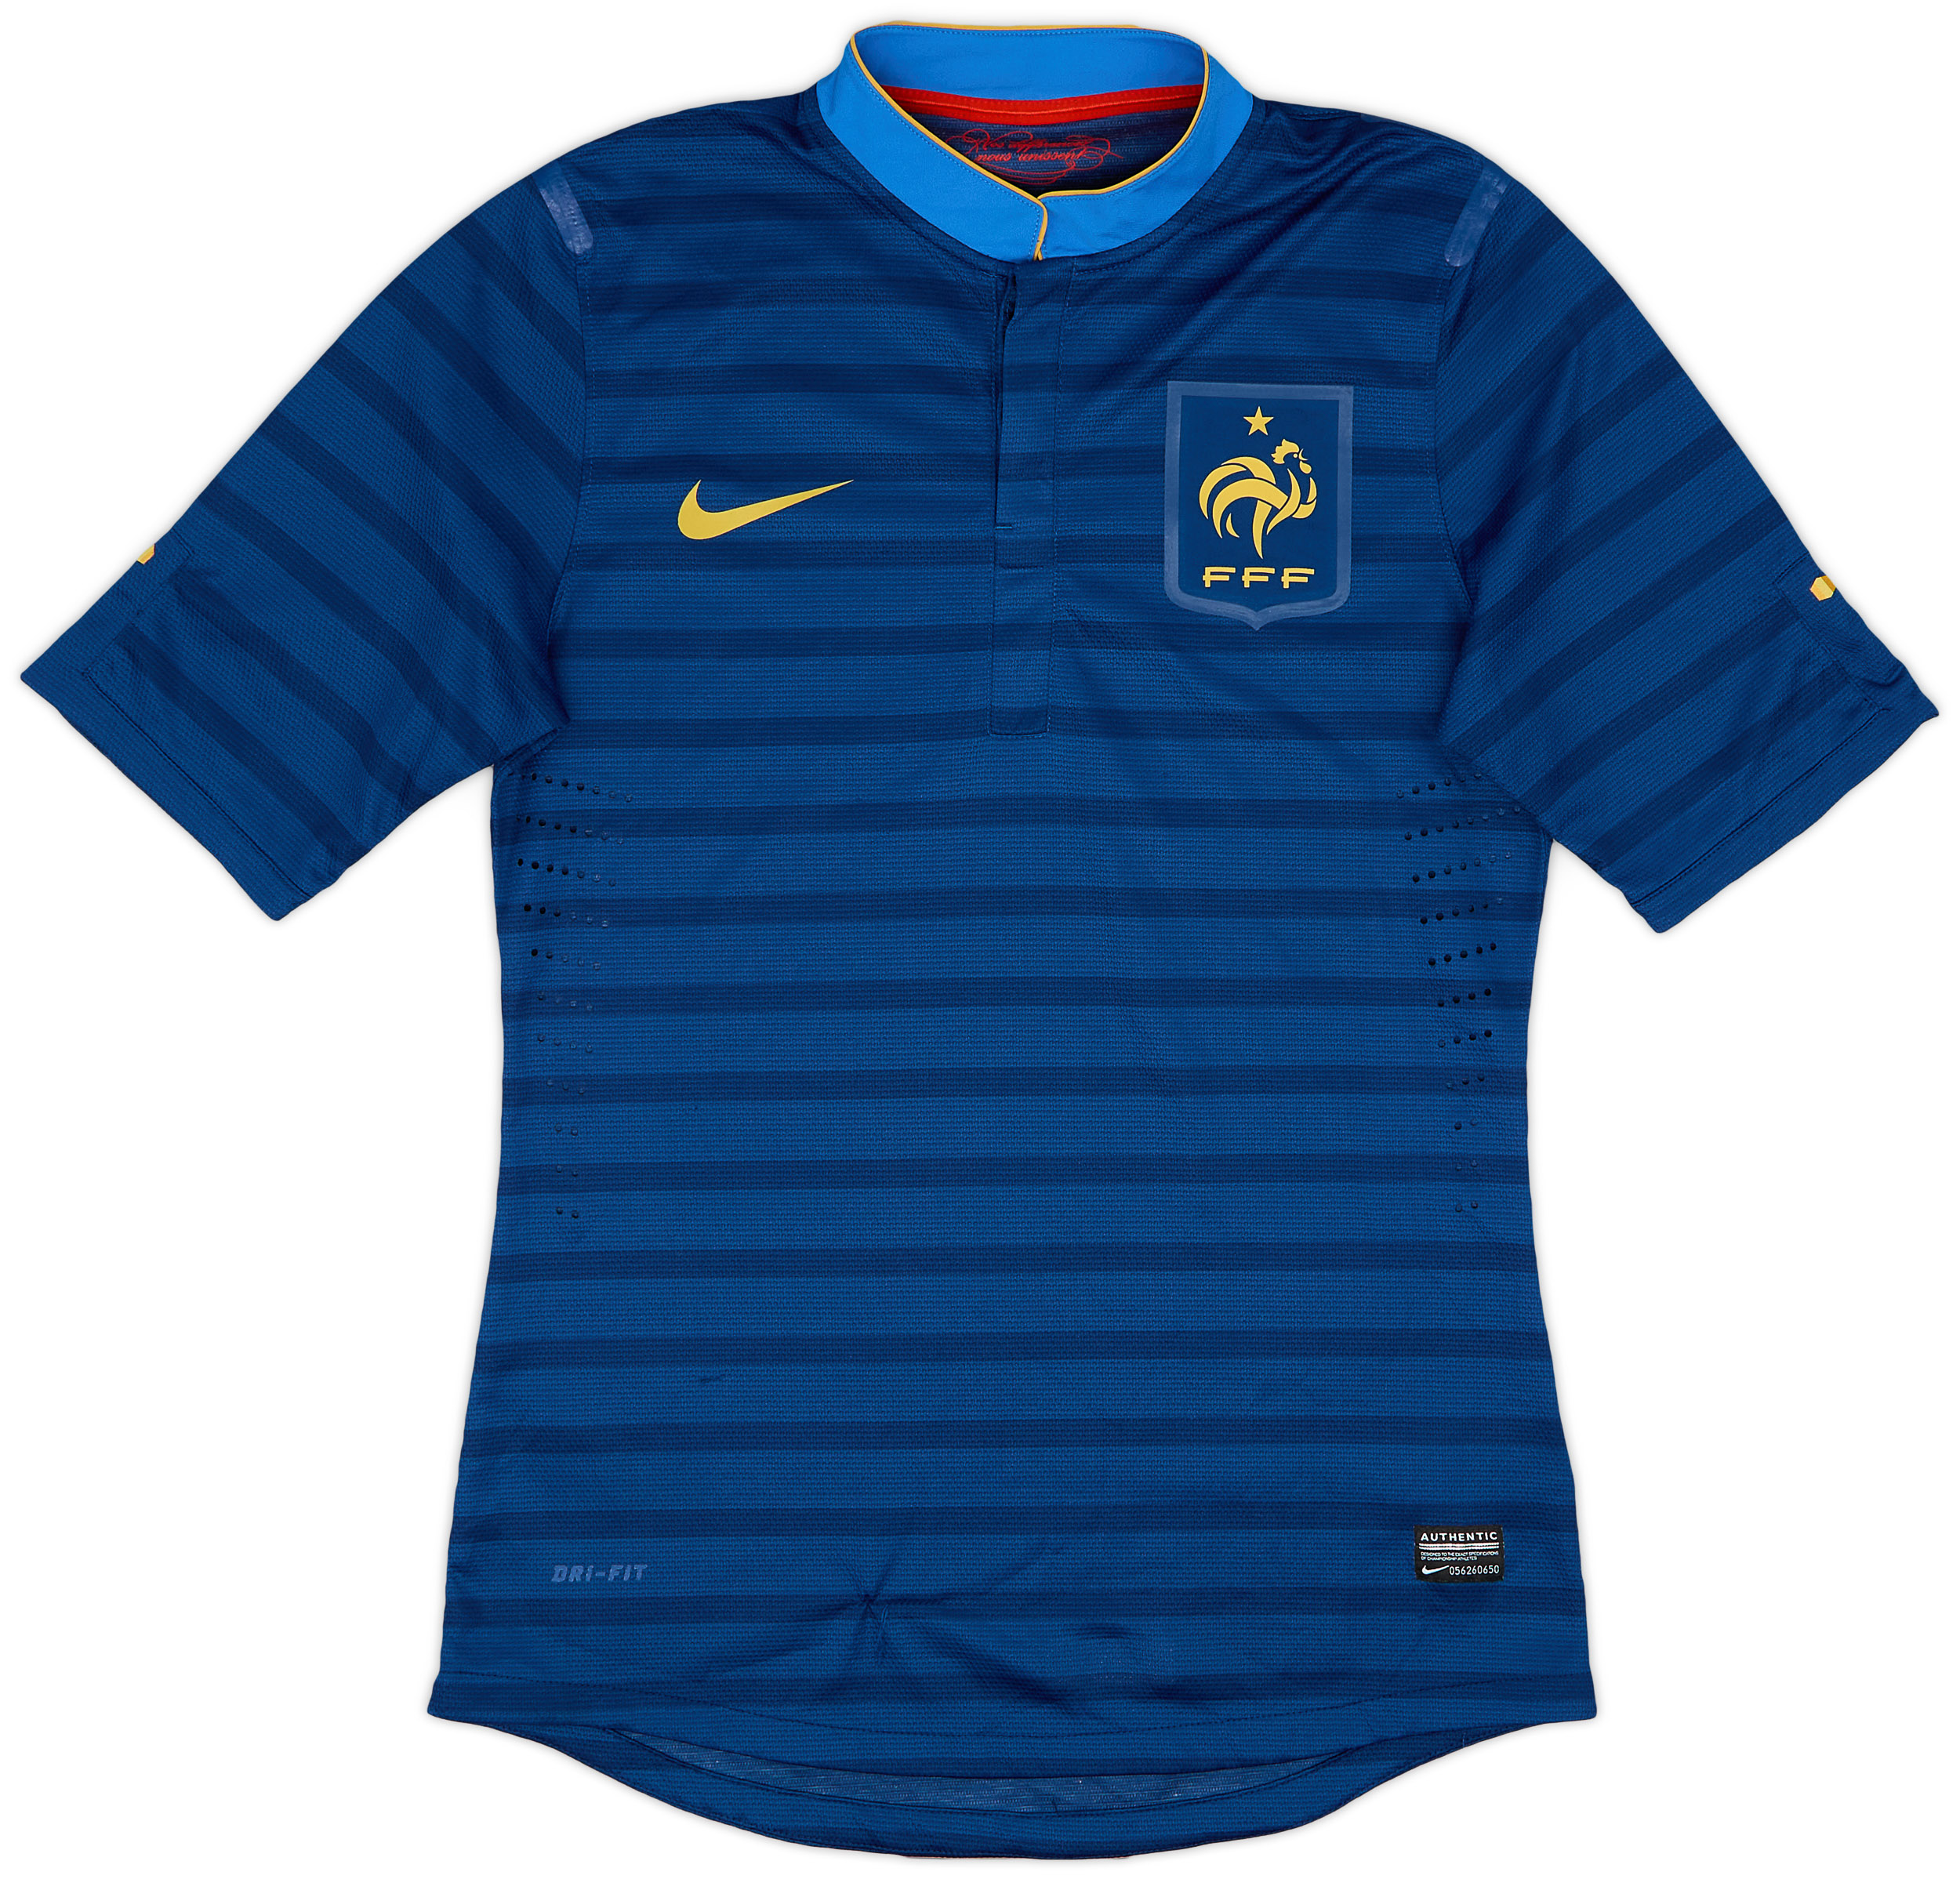 2012-13 France Authentic Home Shirt - 8/10 - ()